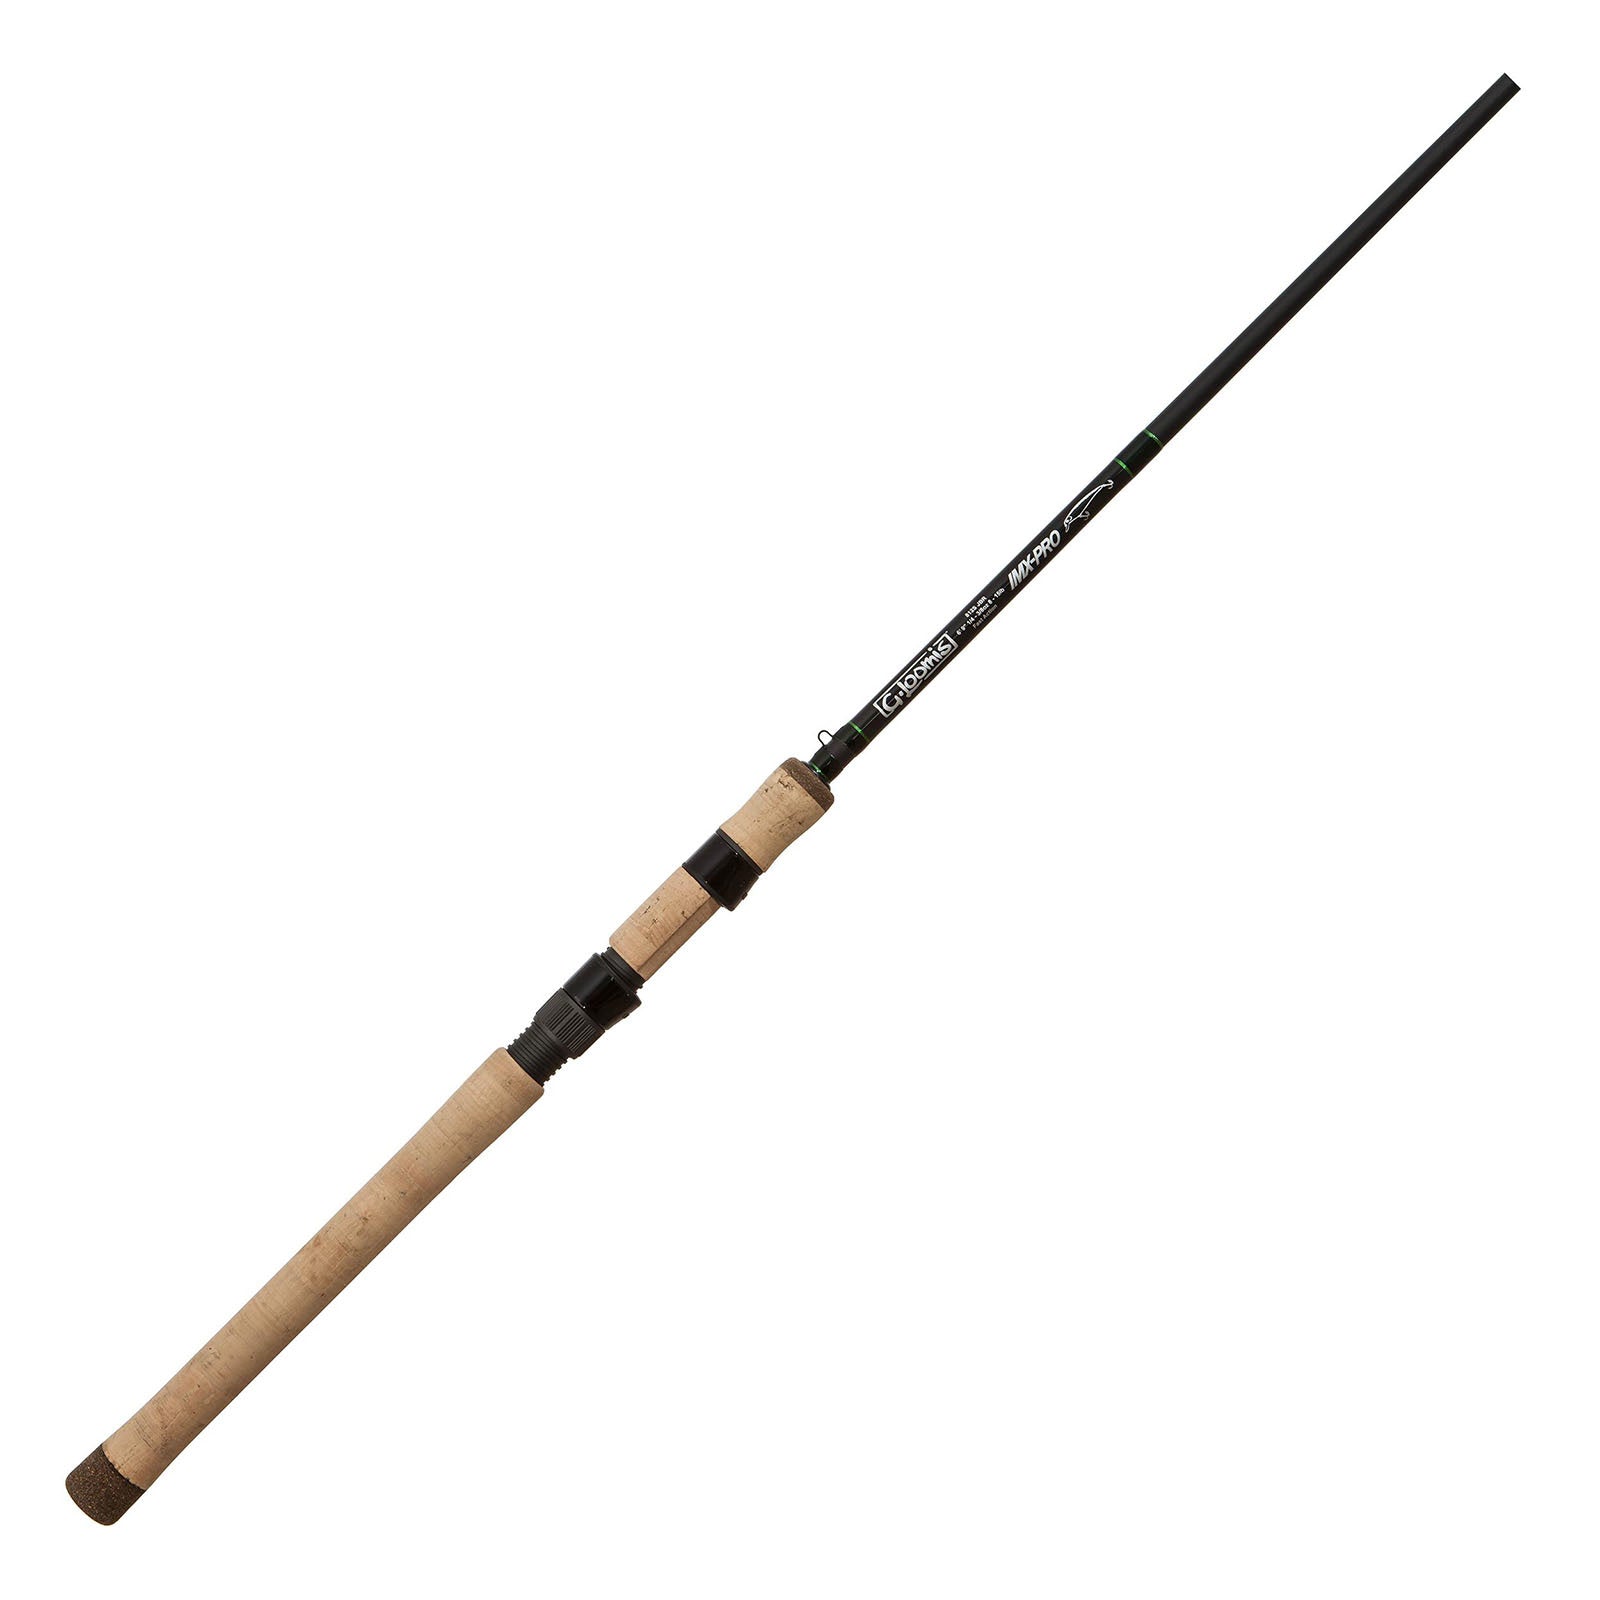 Lew's Wally Marshall Pro Target Crappie Rod